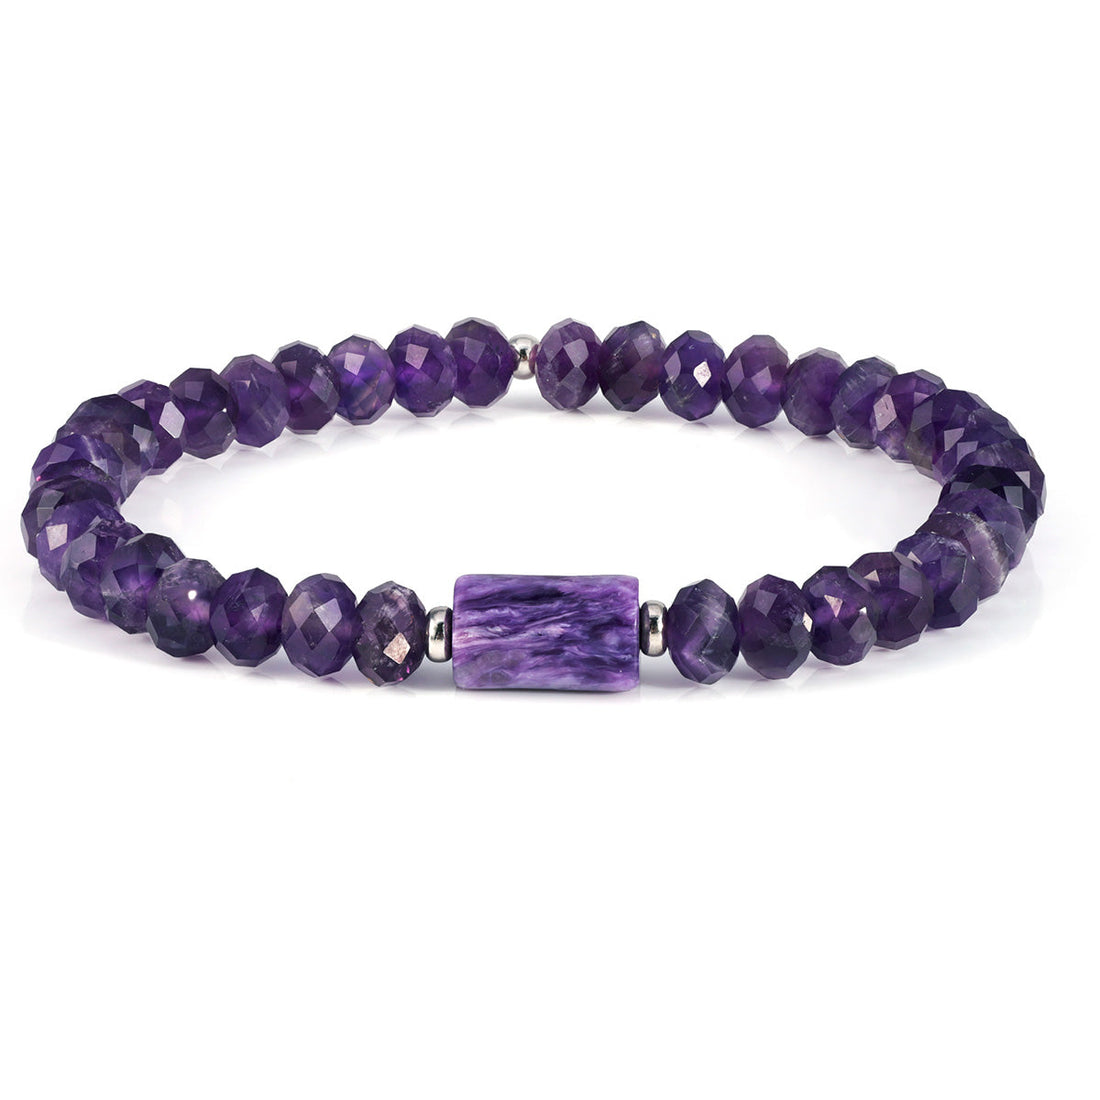 Amethyst and Charoite Stretch Bracelet